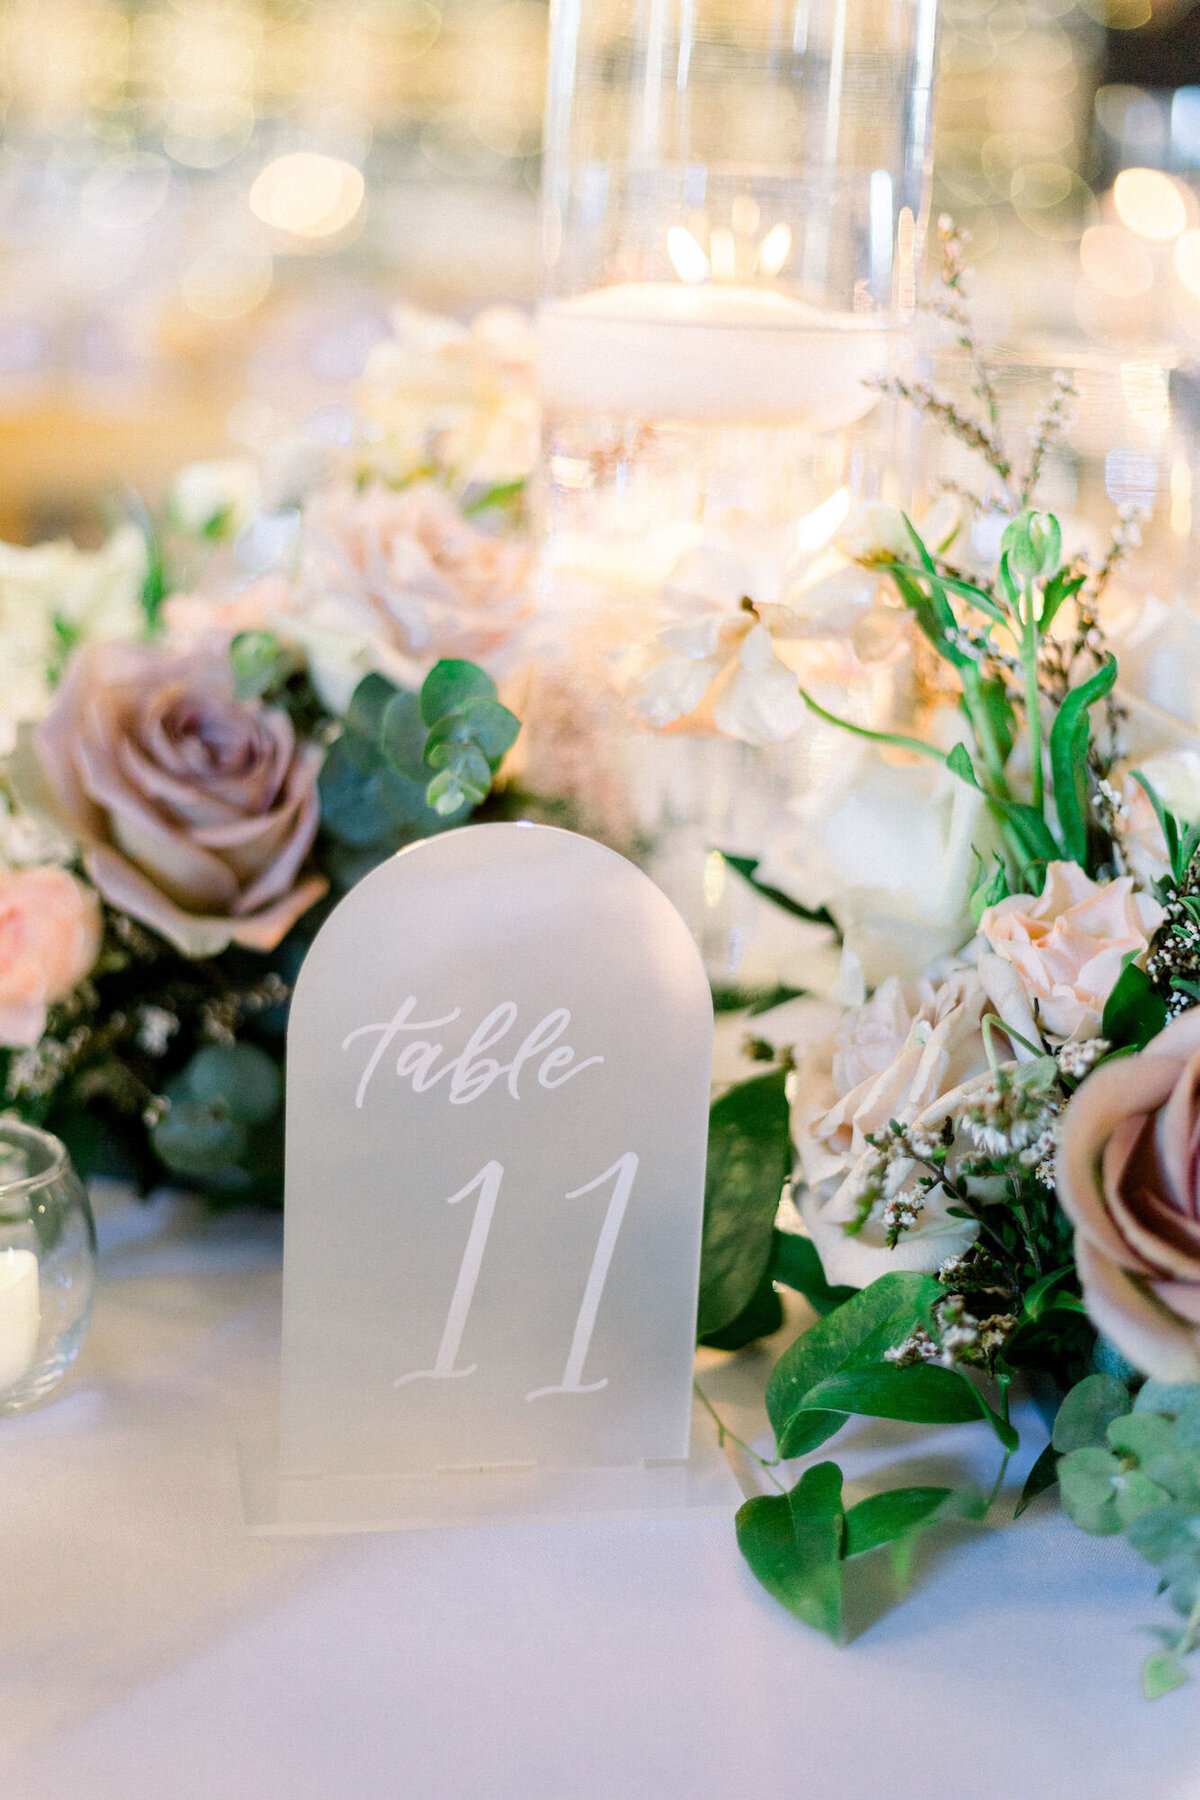 Rental arch table numbers using clear frosted acrylic